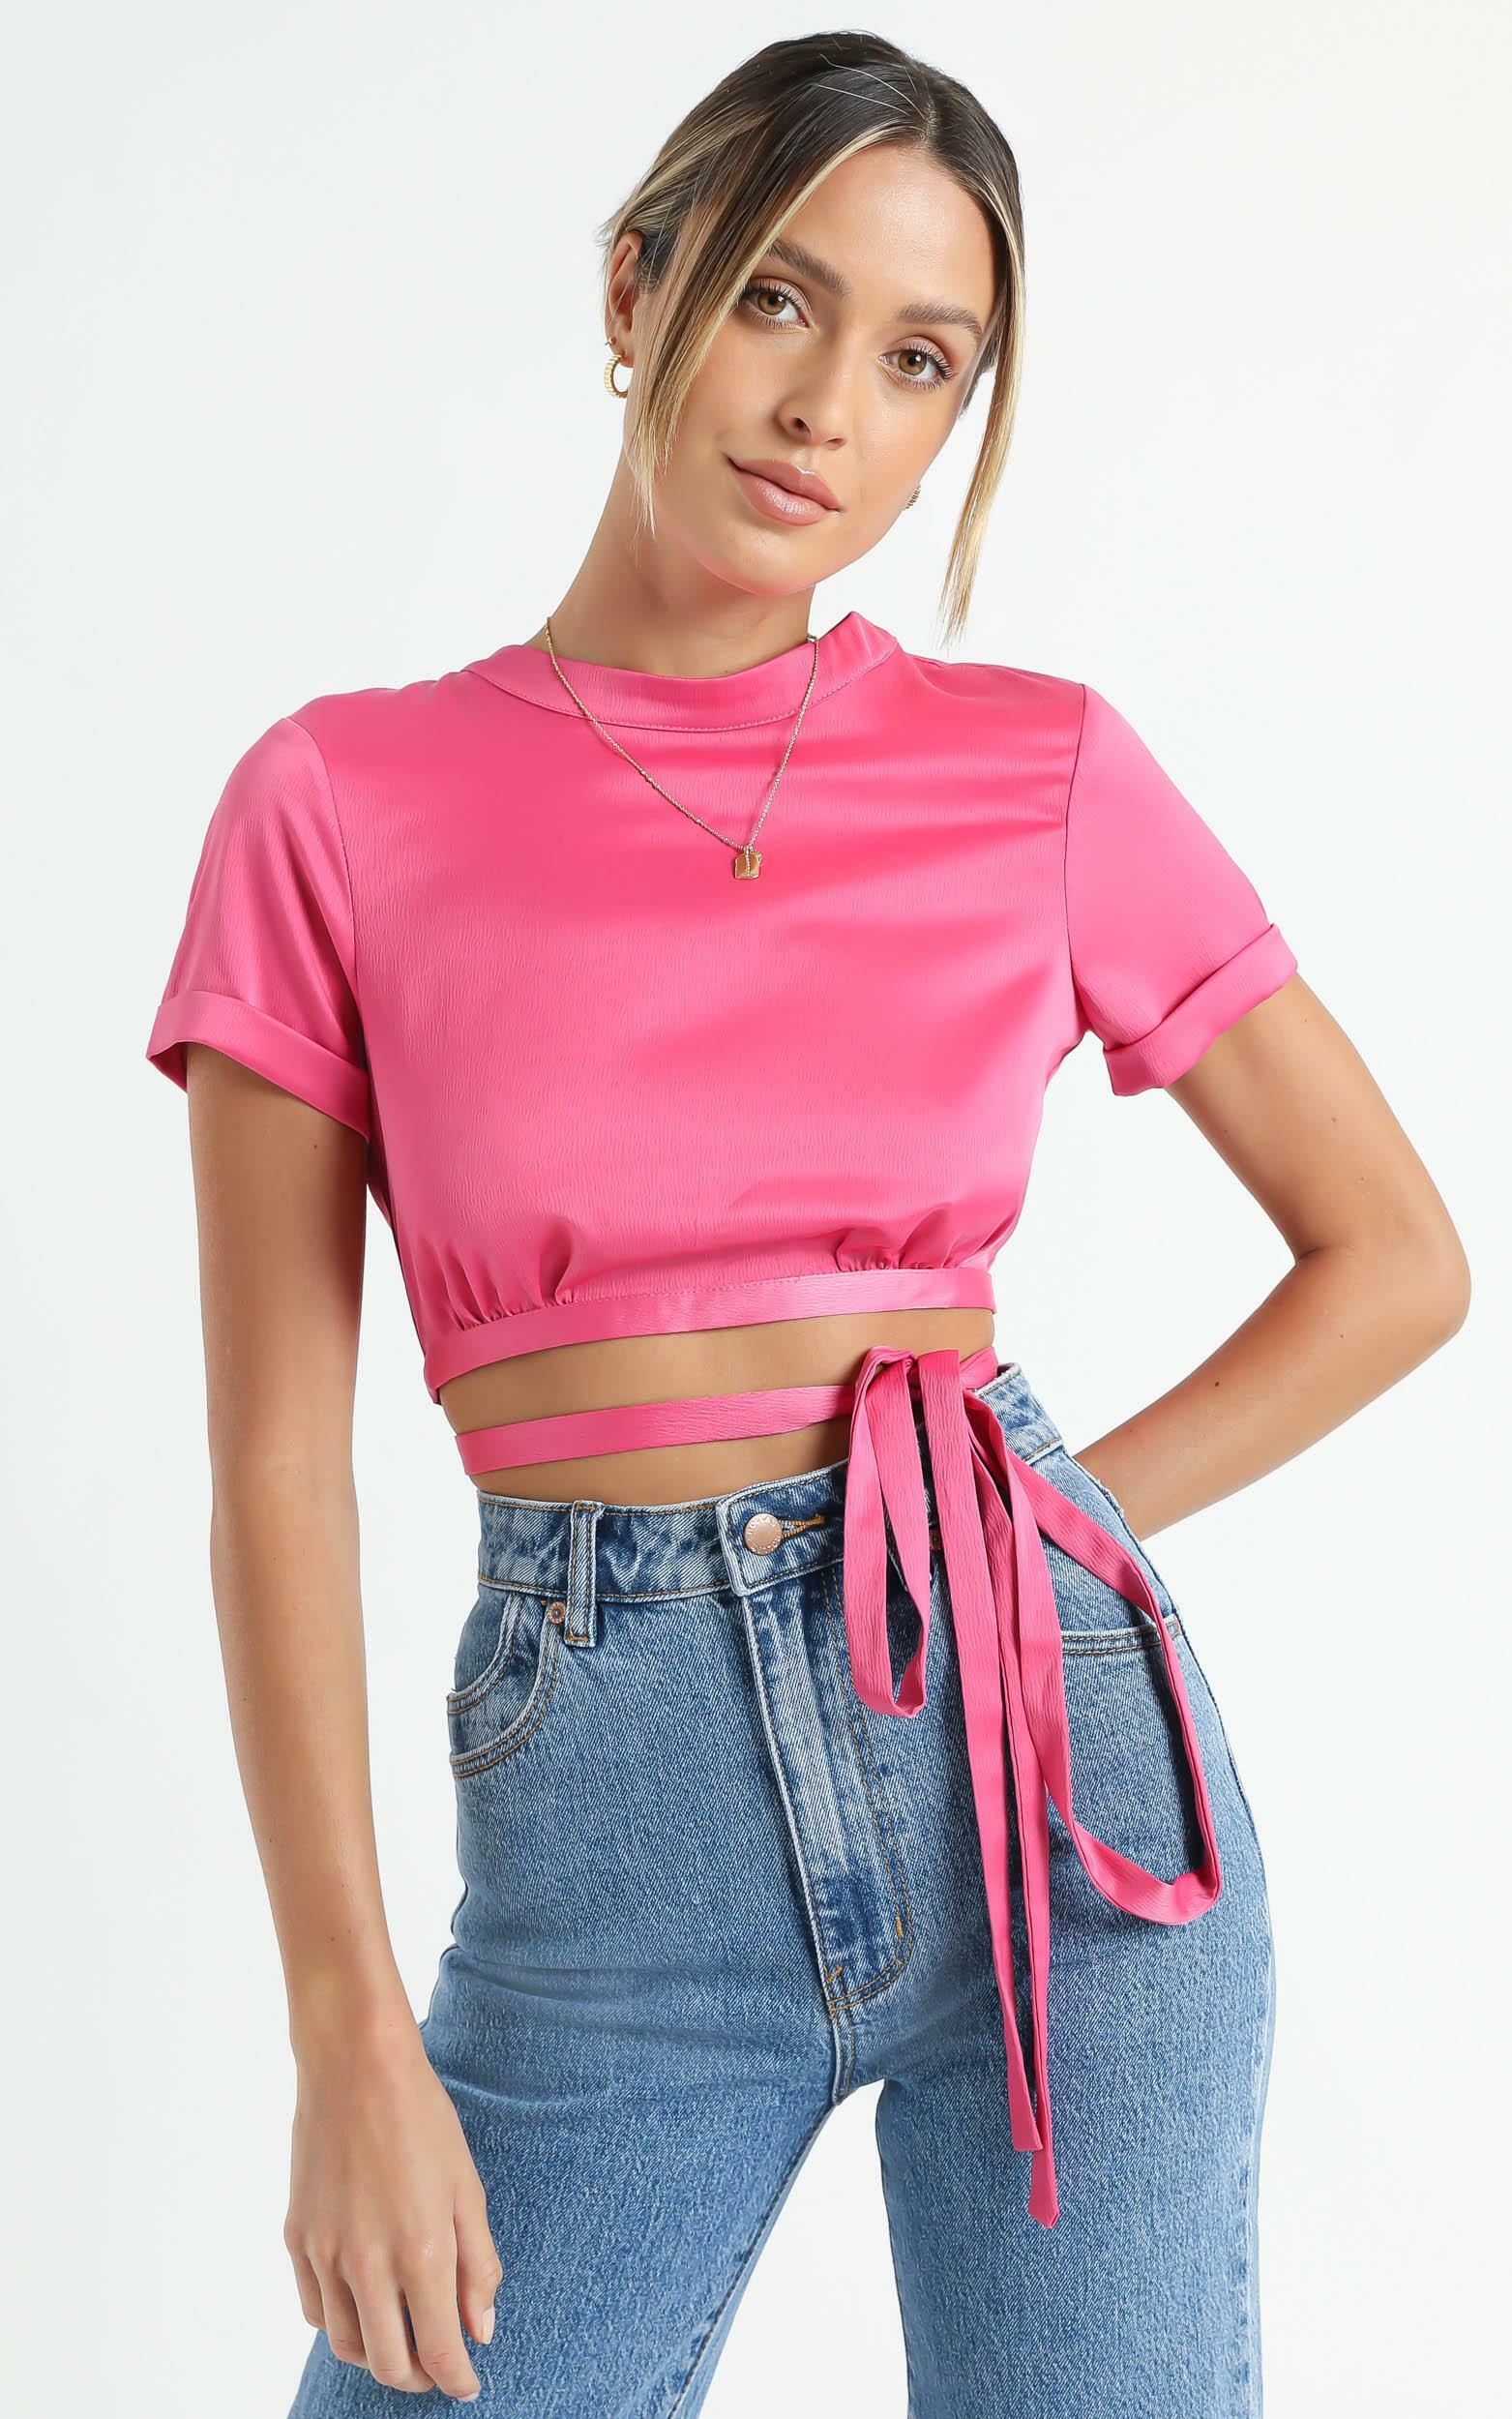 Dynasty Top in Fuschia - 6 (XS), Pink, hi-res image number null